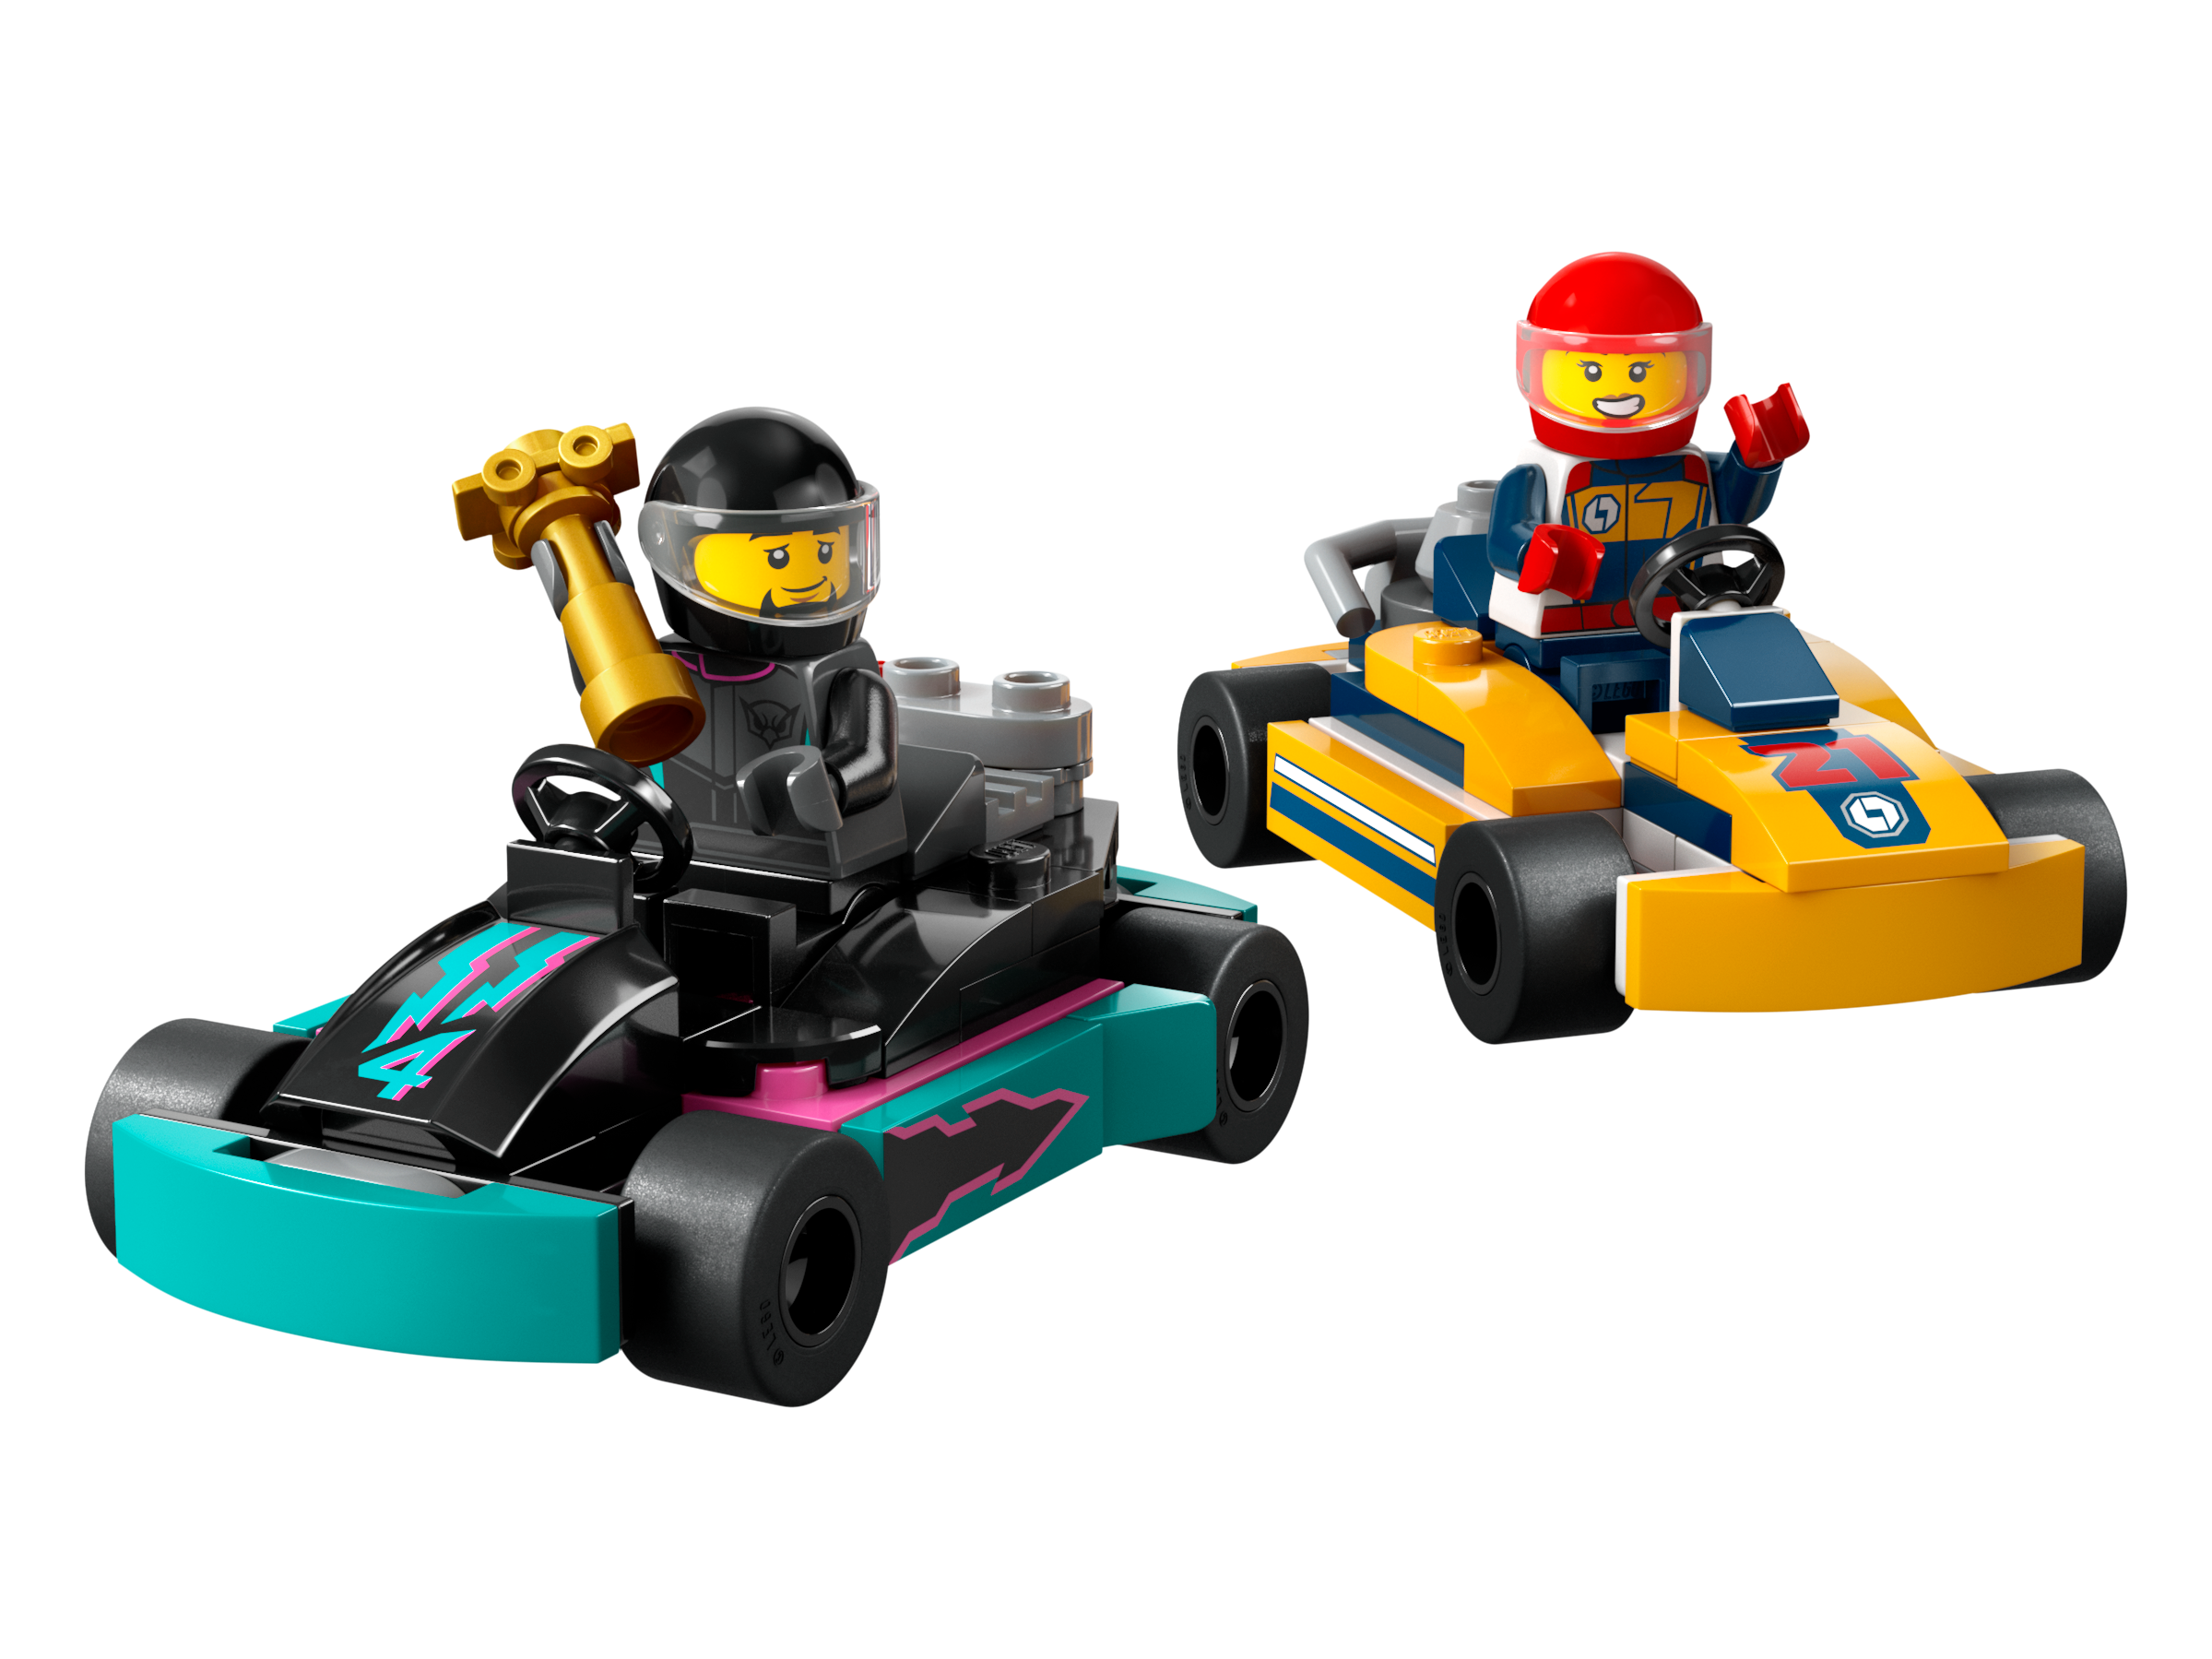 Lego 60400 City Go-Karts and Race Drivers